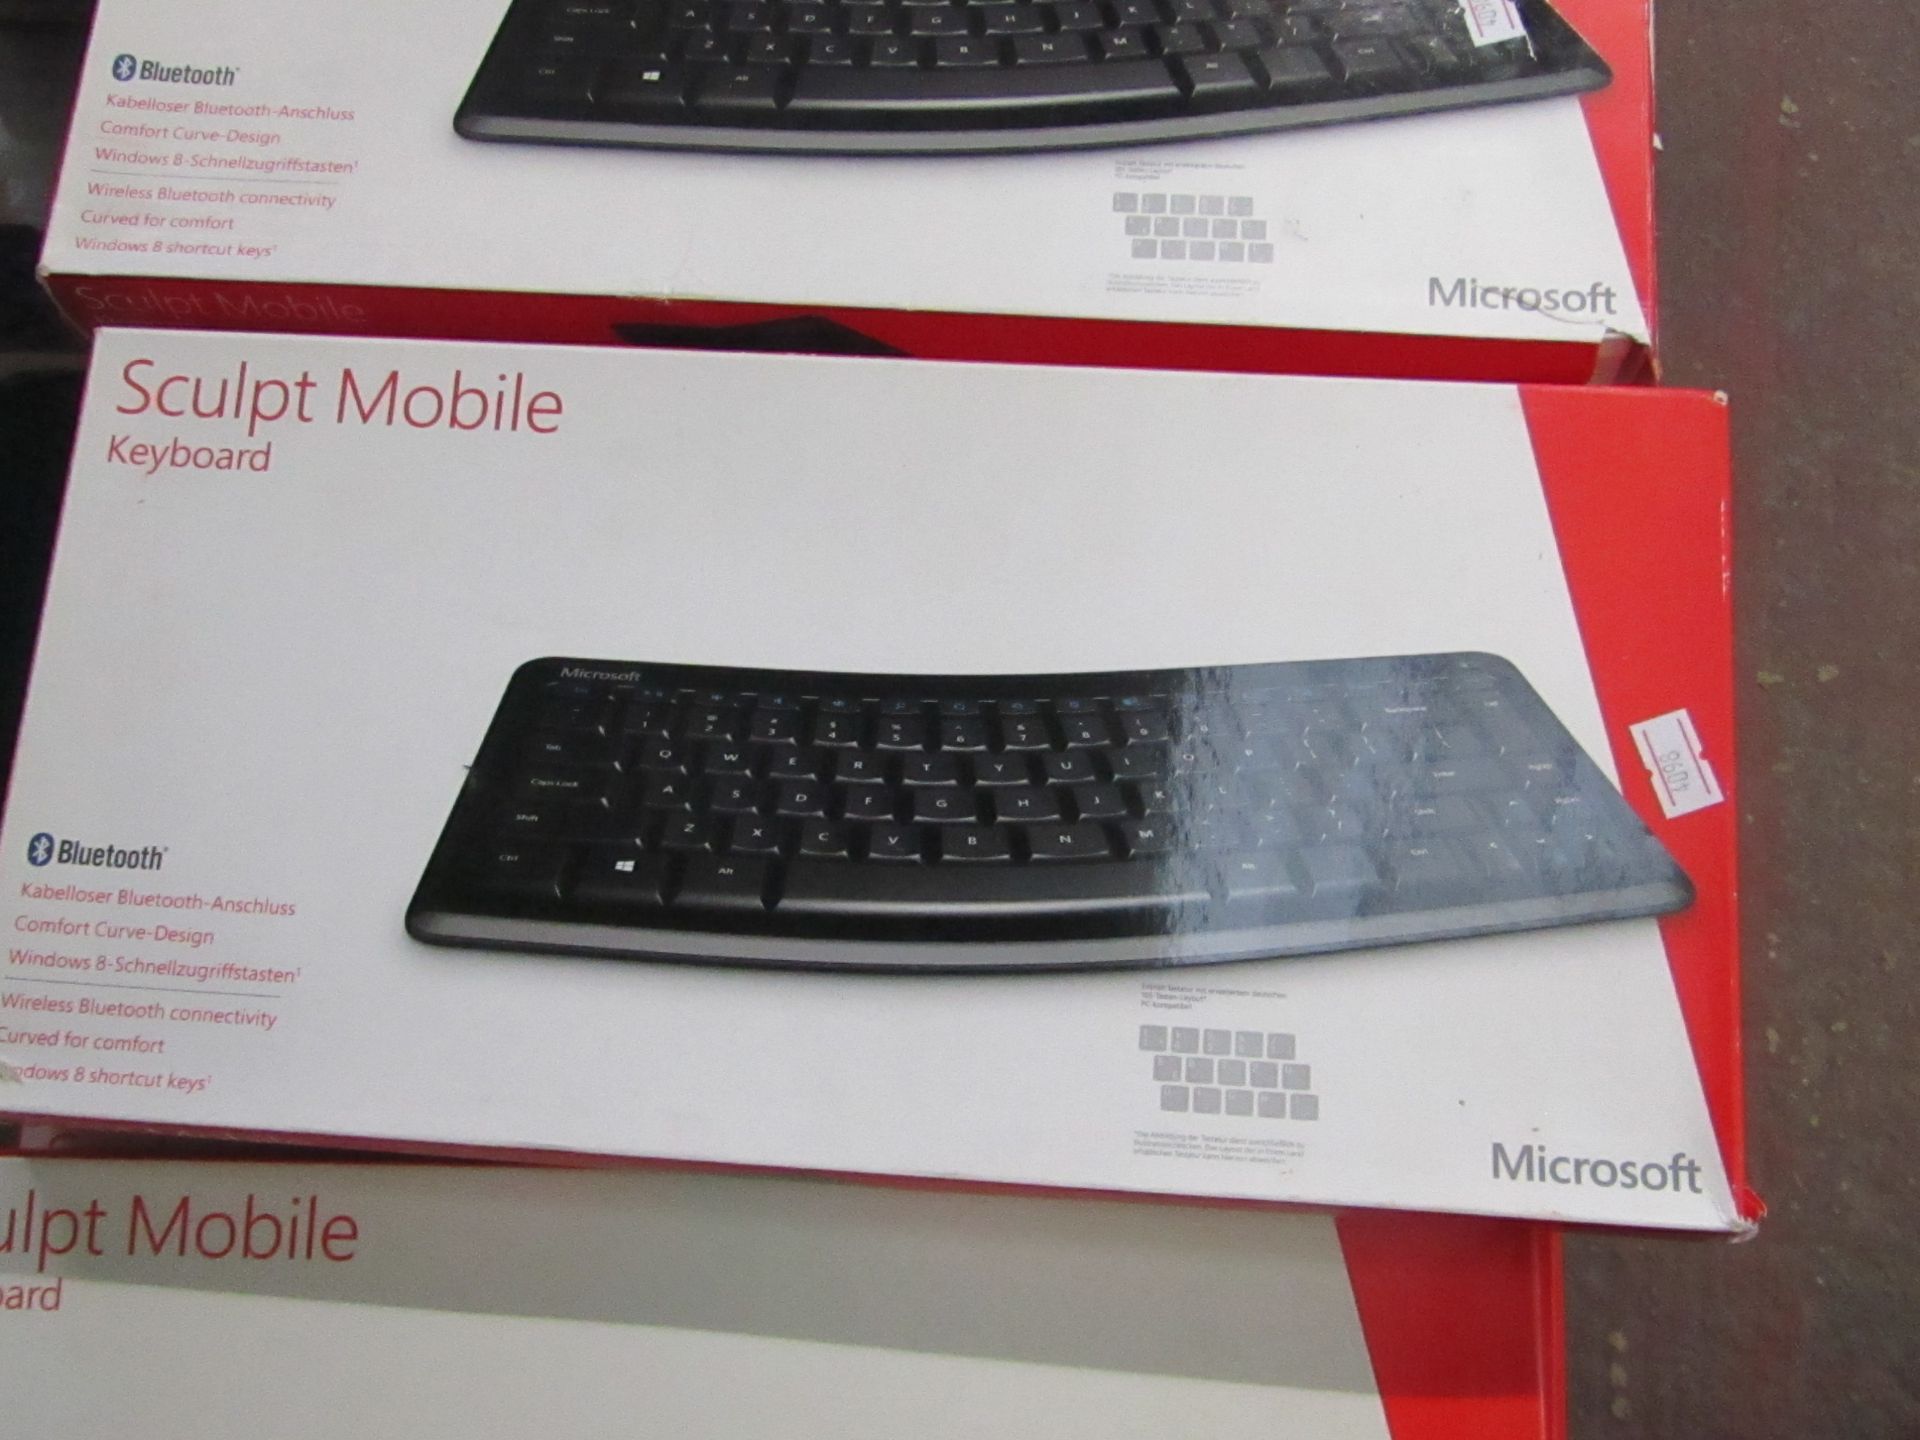 10x Microsoft Sculpt Mobile keyboard, Bluetooth, all new and boxed.